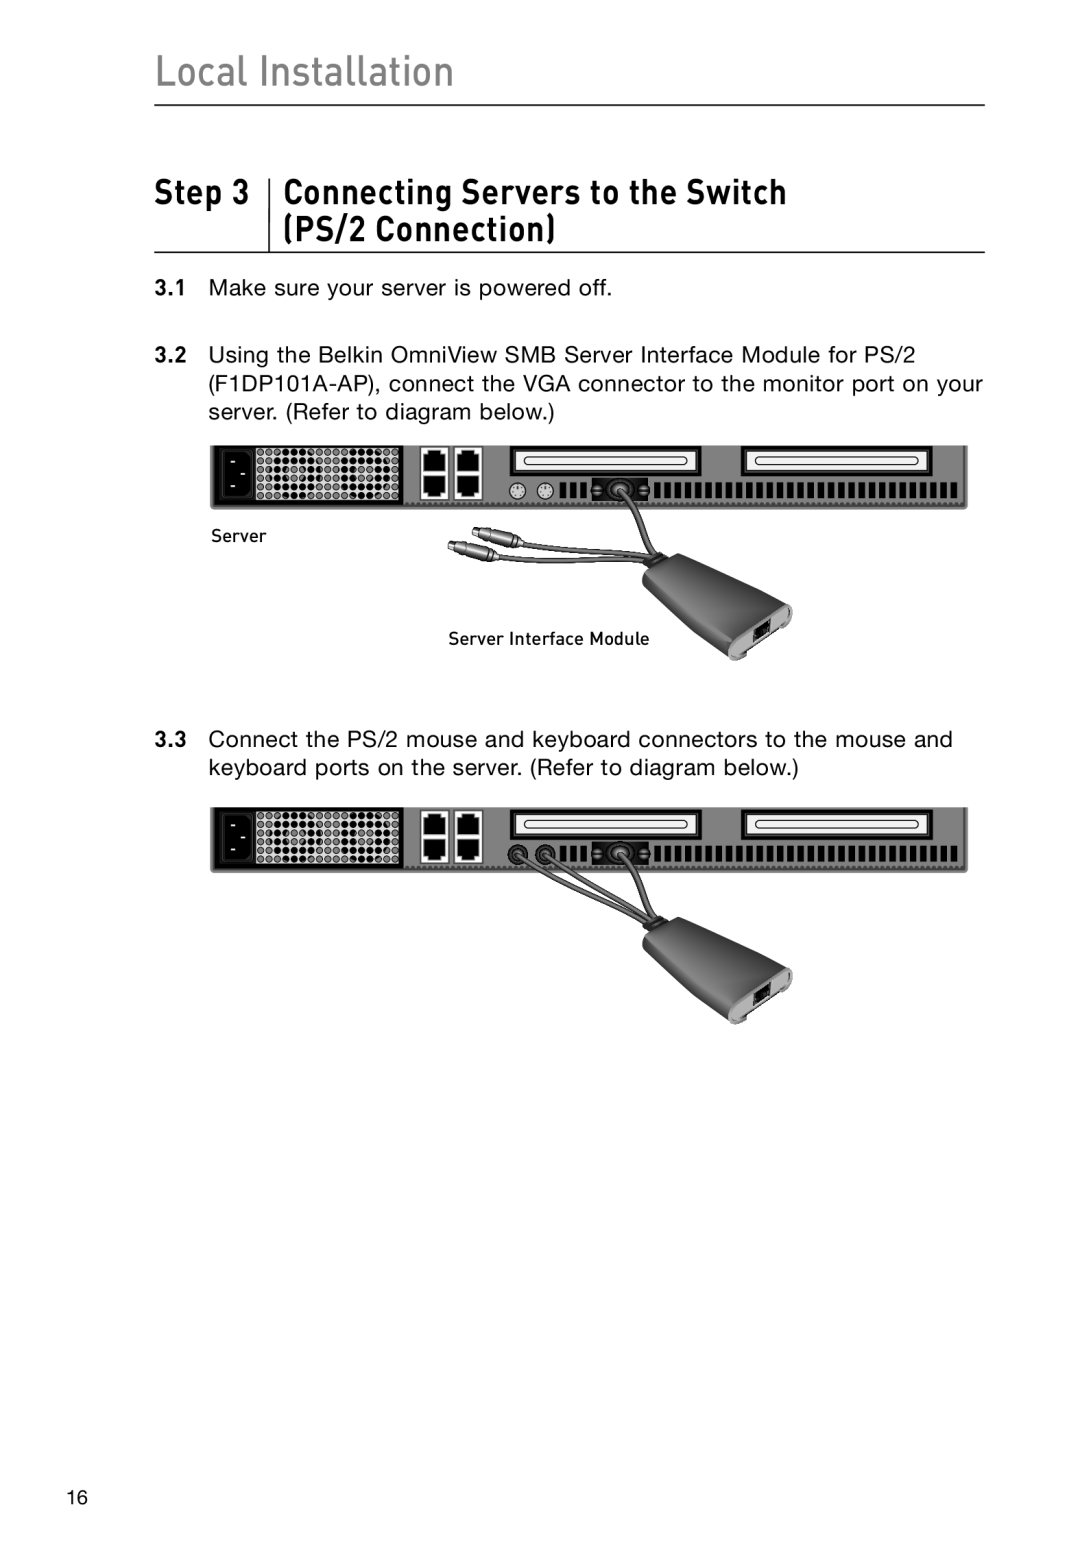 Belkin F1DP108G user manual Connecting Servers to the Switch PS/2 Connection, Local Installation 